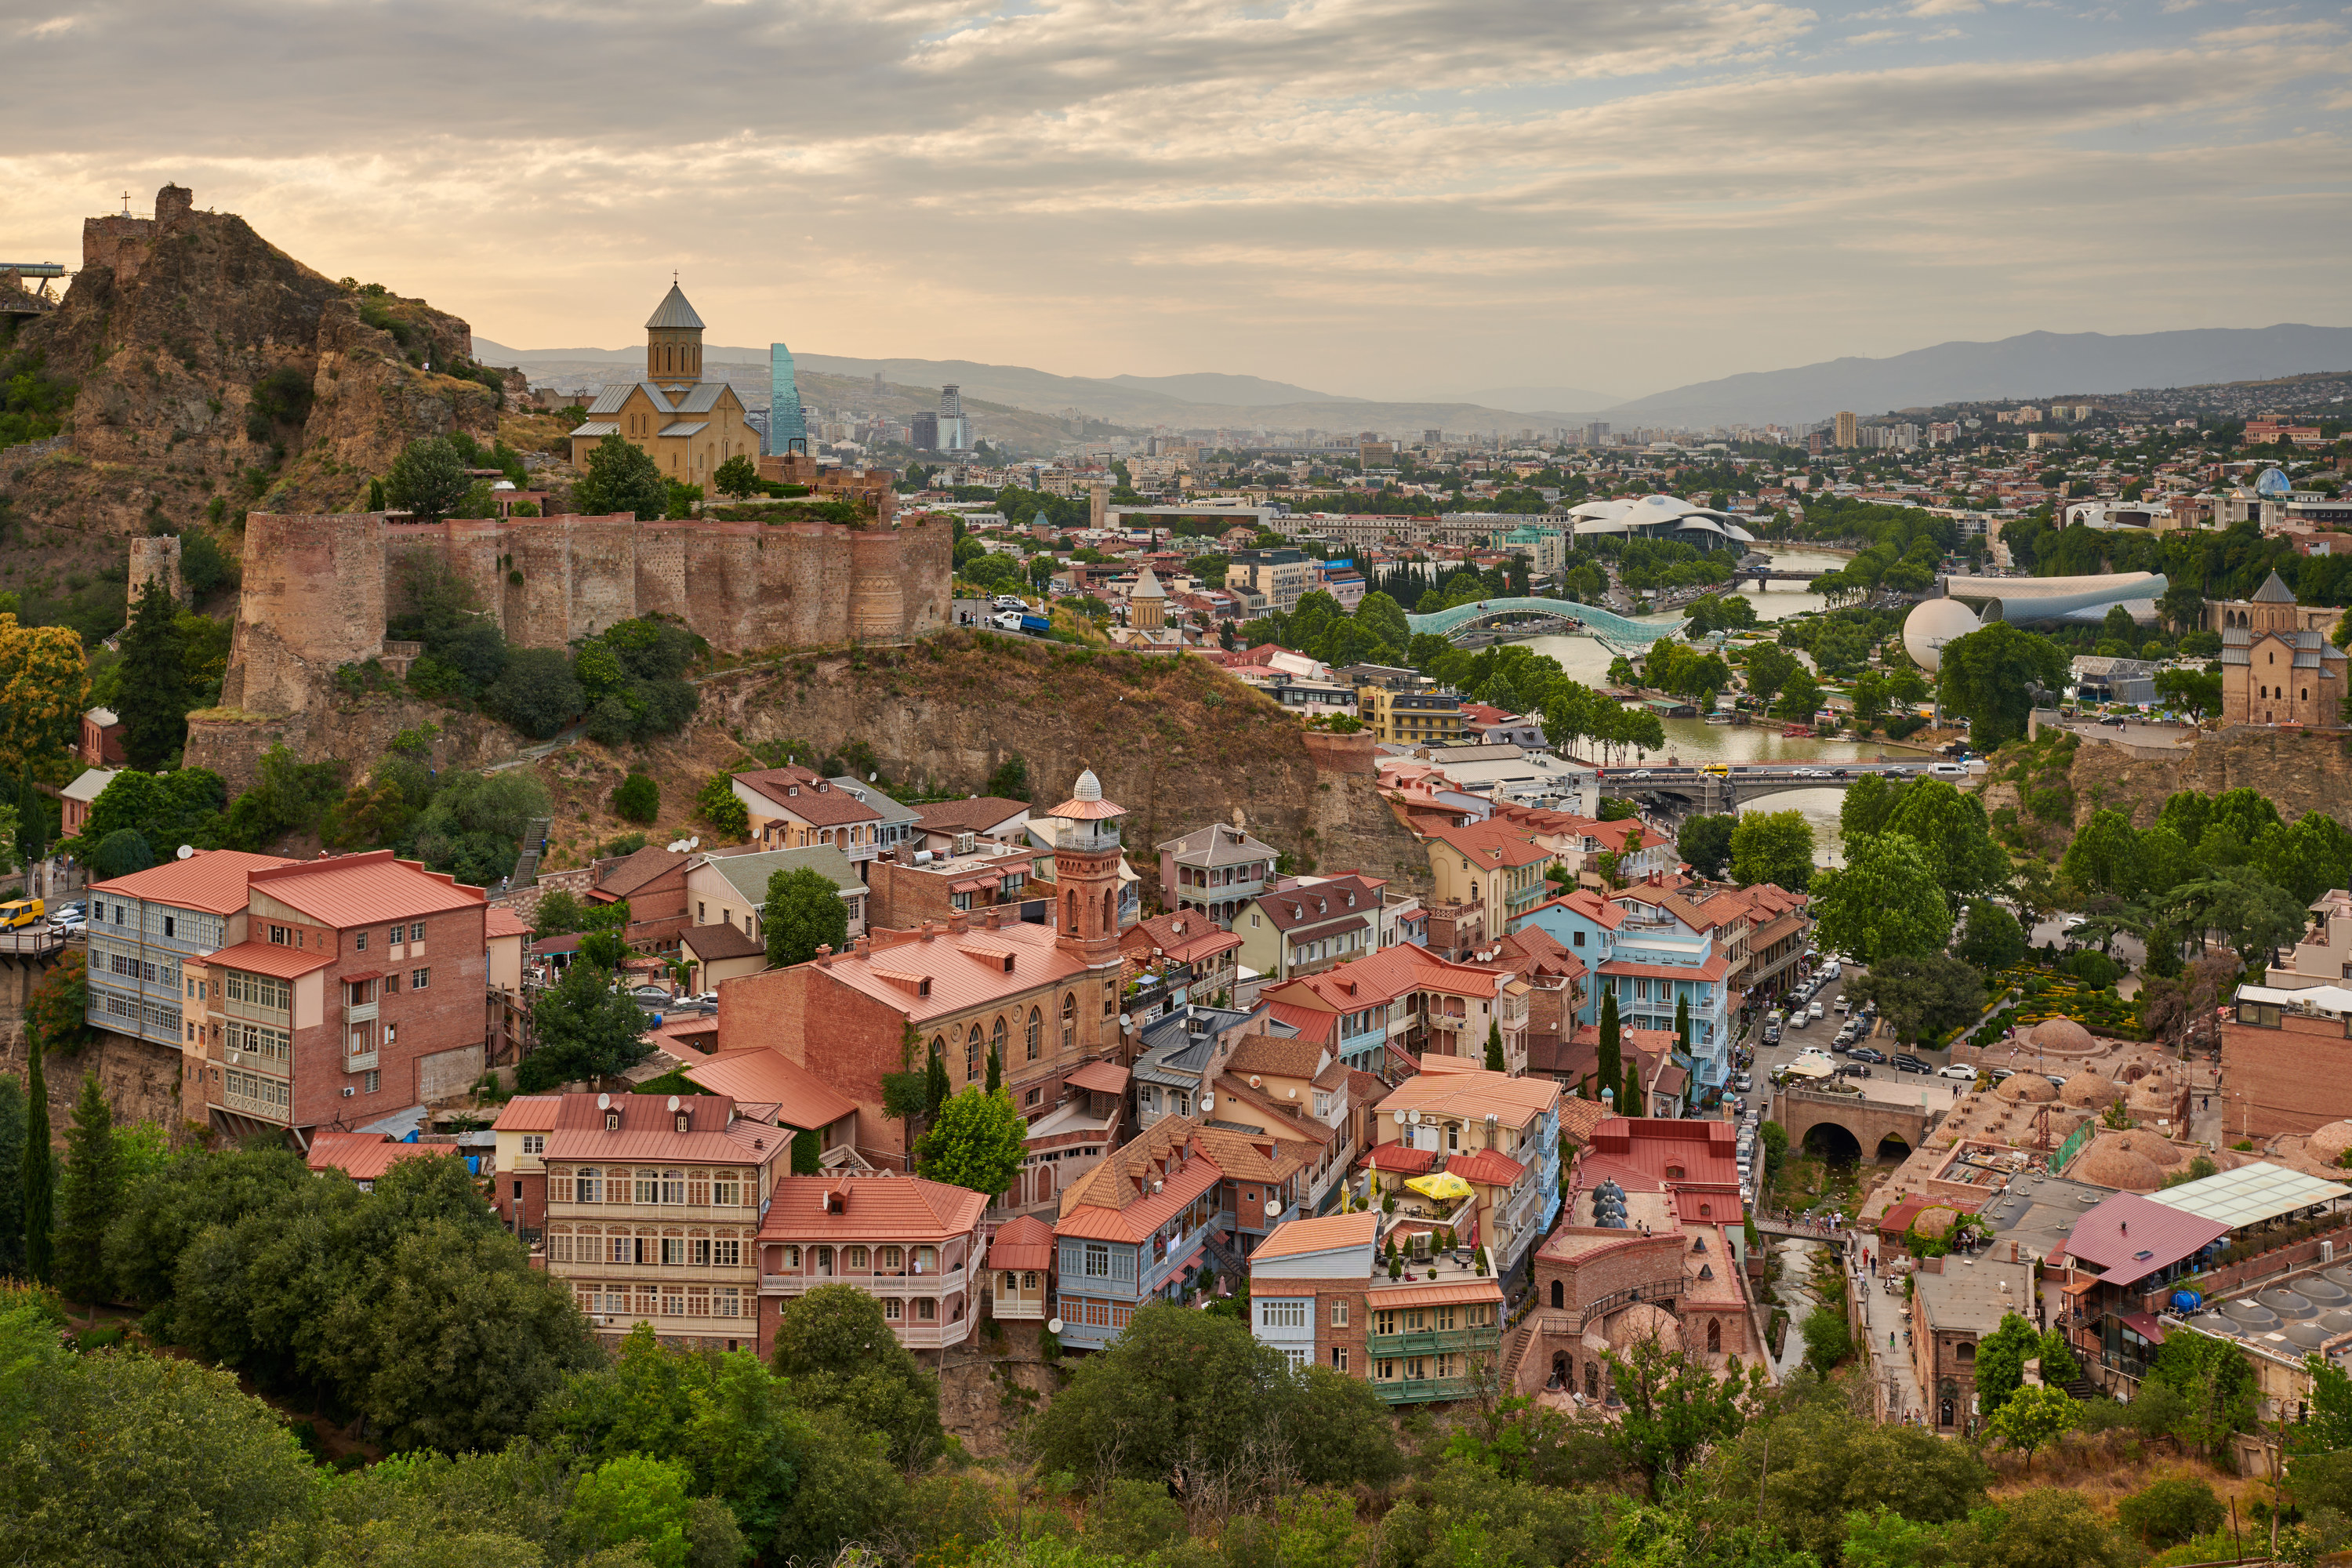 An aerial view of Tbilisi which shows its close and colorful buildings as well as a large river with a bridge in the background